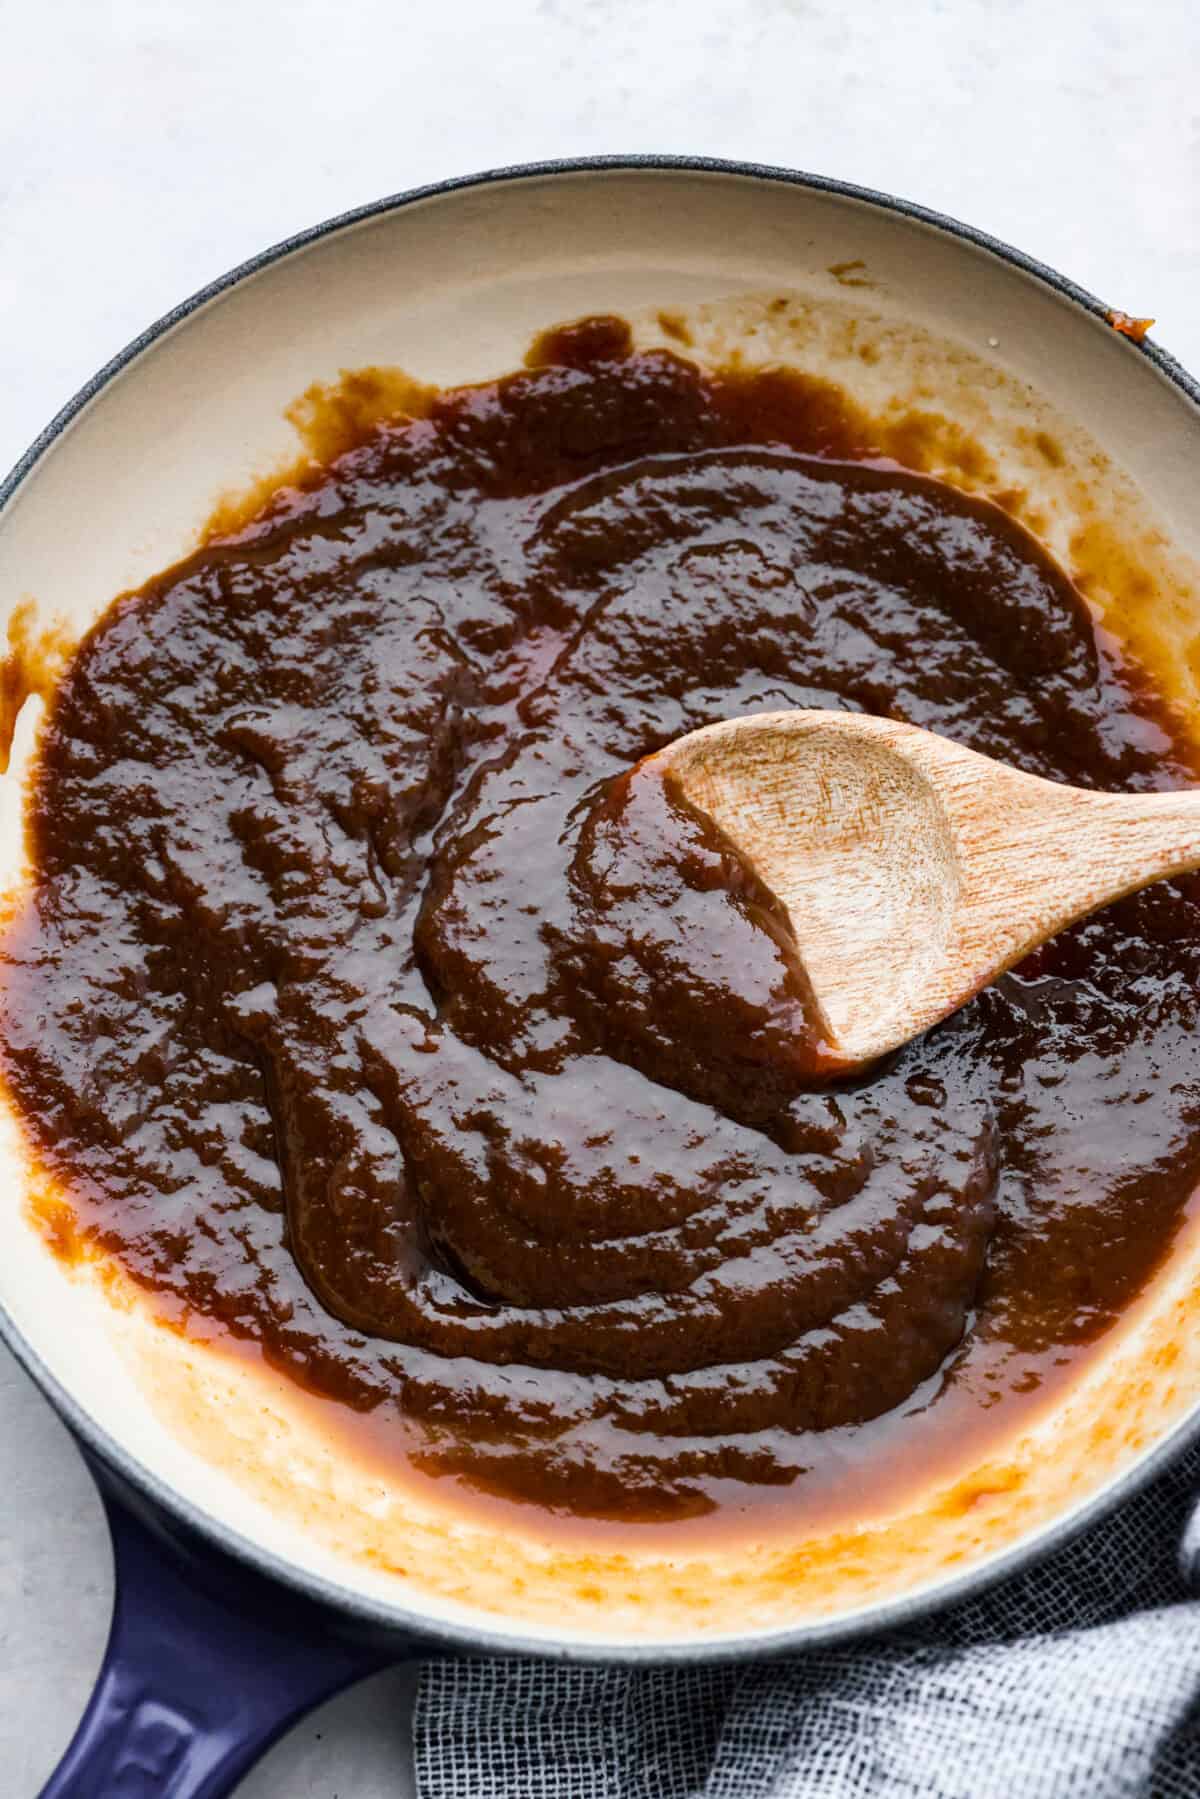 Top view of tamarind sauce in a saucepan with a wood serving spoon.